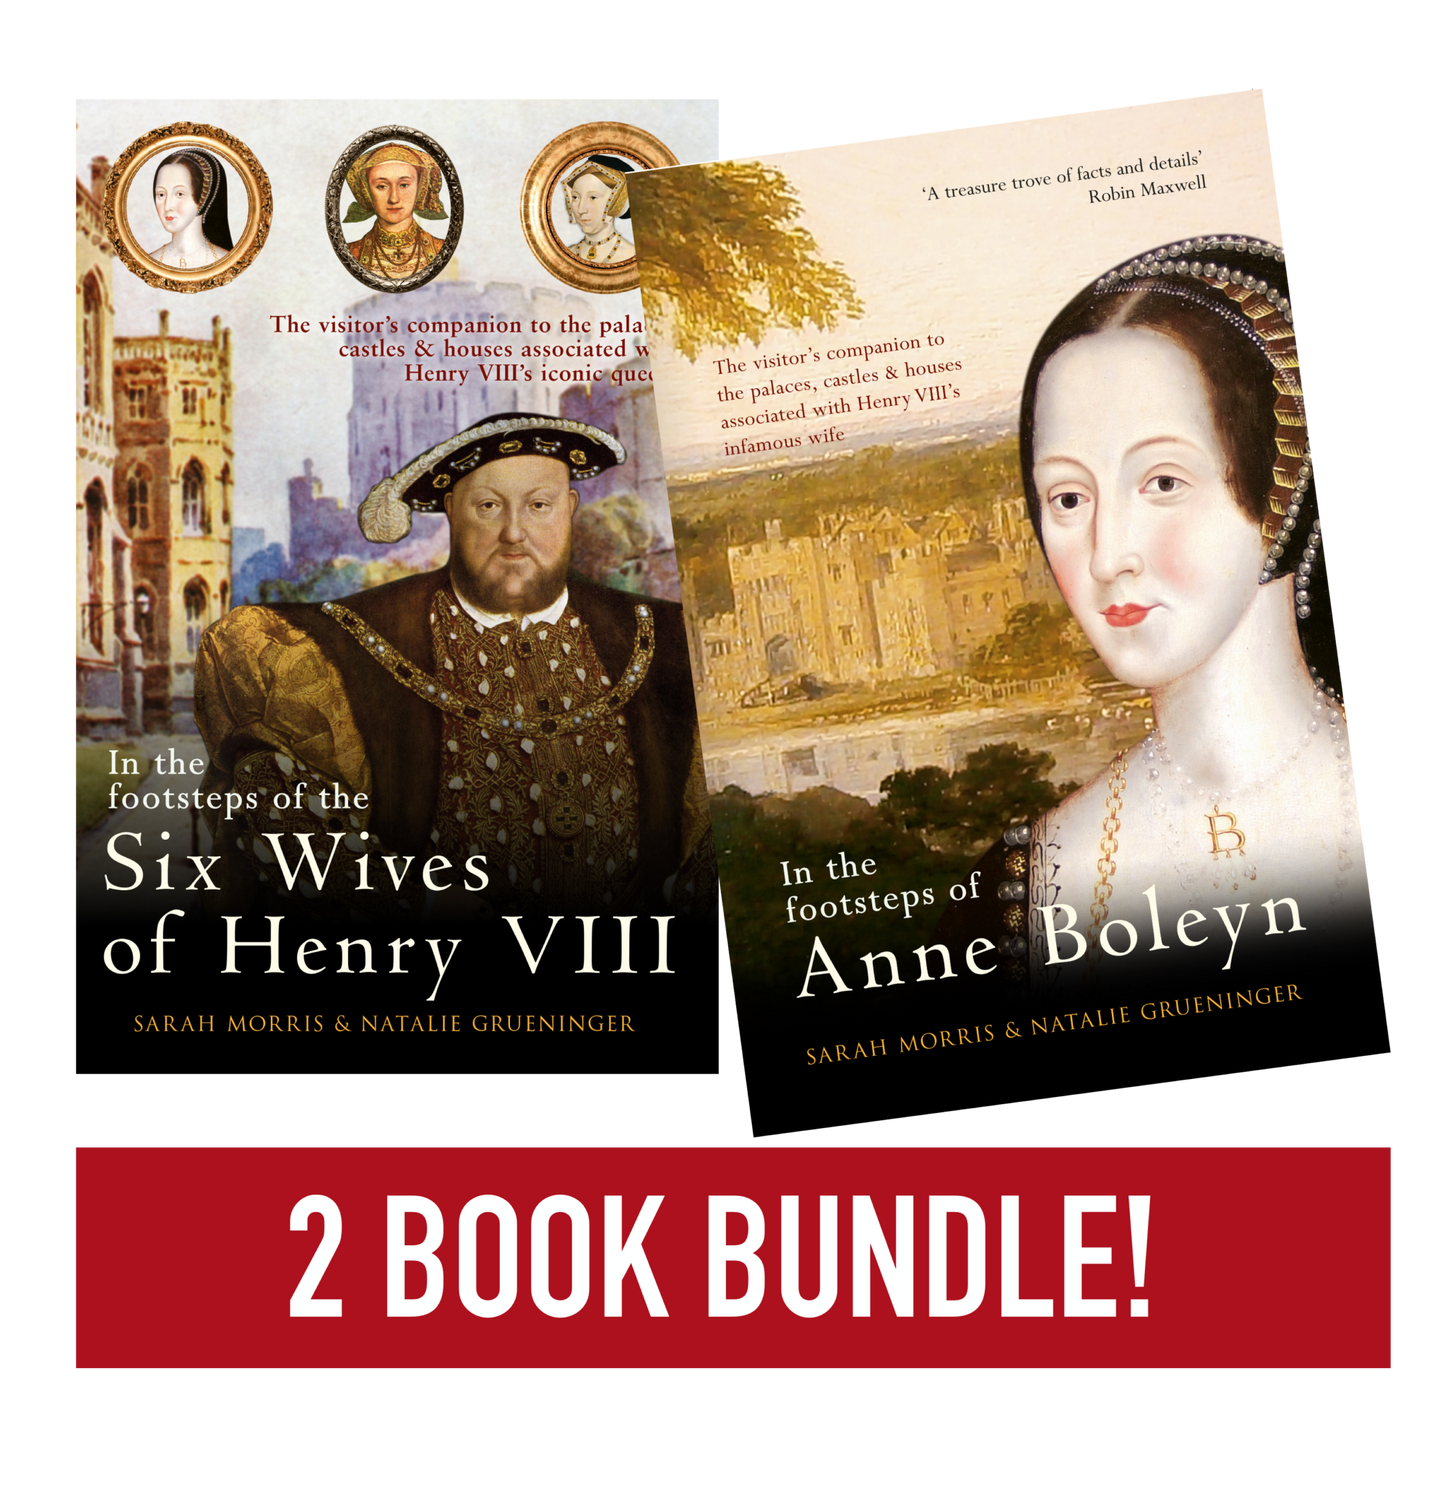 The Time Traveller's Special Collection: 'In the Footsteps of Anne Boleyn' & 'In the Footsteps of the Six Wives of Henry VIII' (Signed with Personal Dedication)